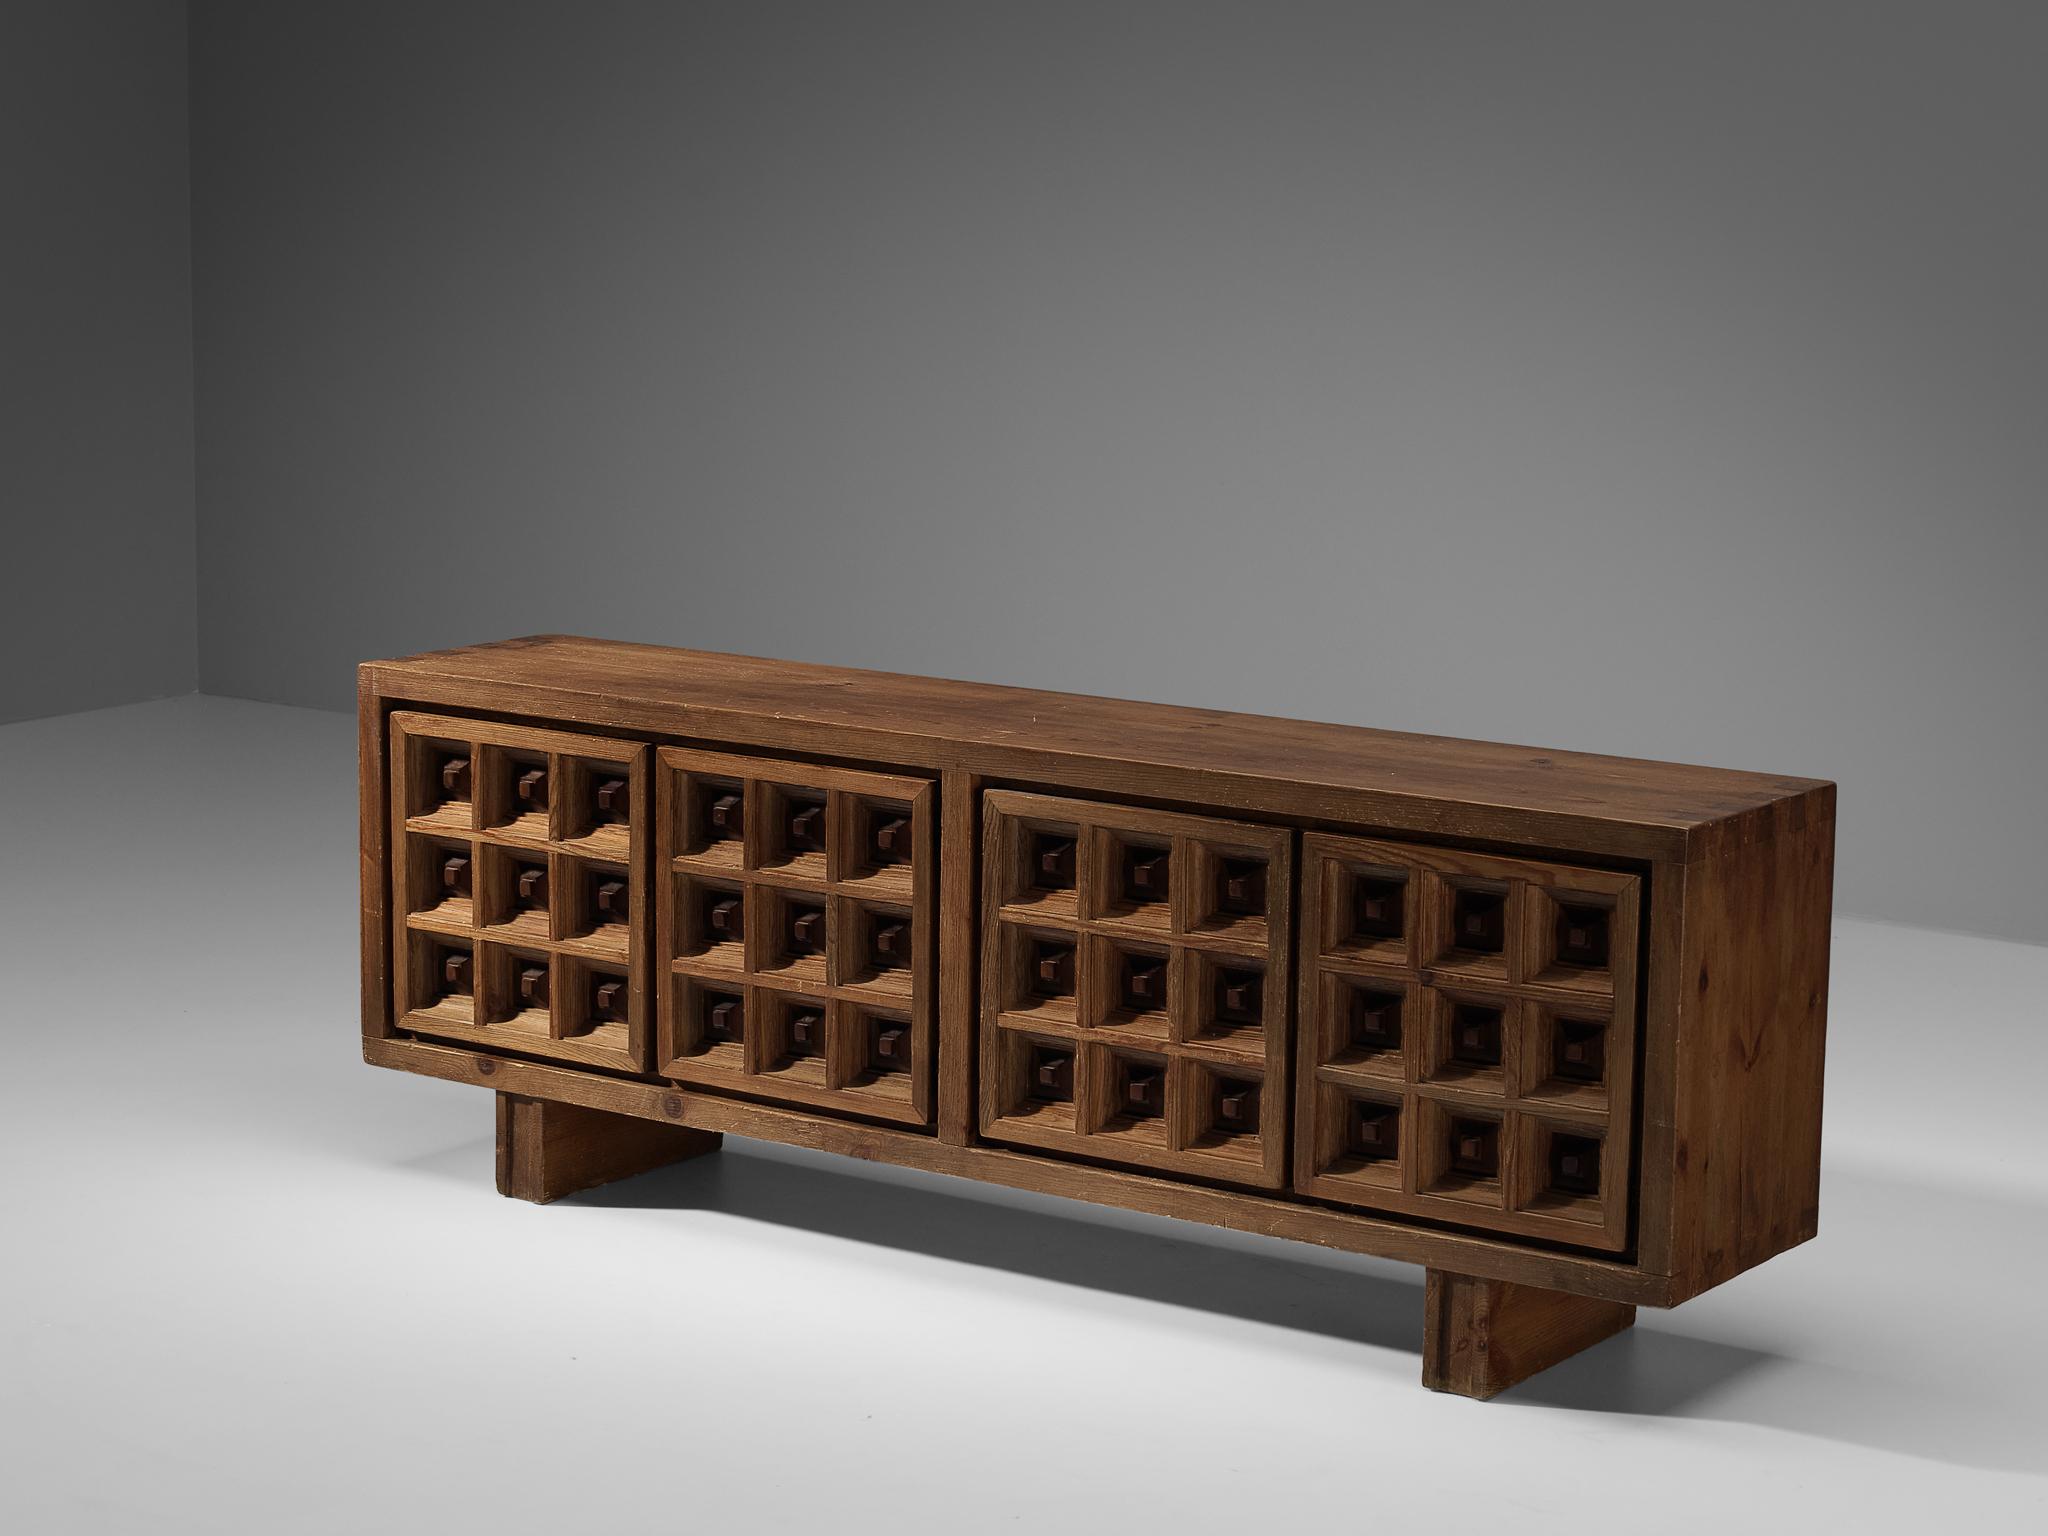 Biosca, sideboard, stained pine, Spain, 1960s.

Outstanding Spanish sideboard that is executed by Biosca in a beautiful way. The door panels feature a relief surface of graphic carved squares. This is very typical for Brutalist style, while the